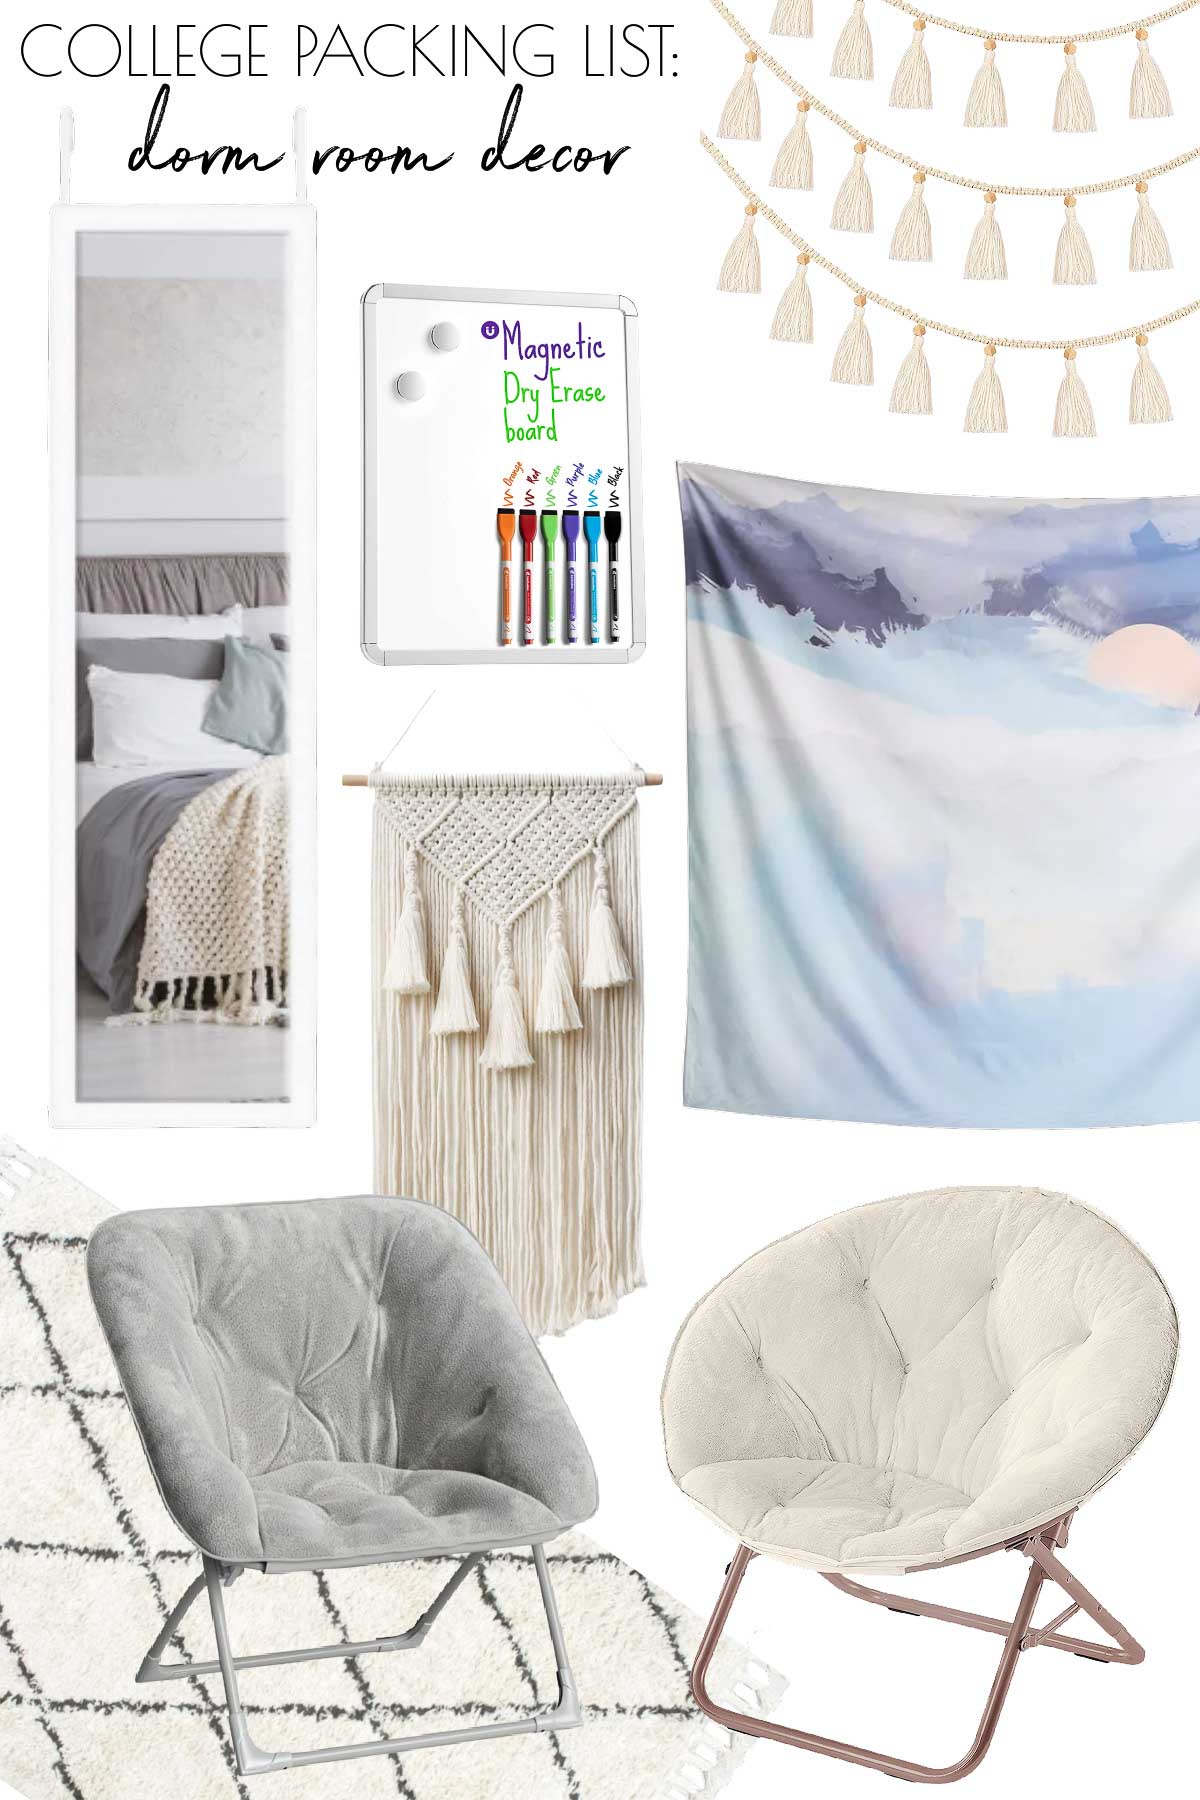 Dorm decor items to add to your college packing list